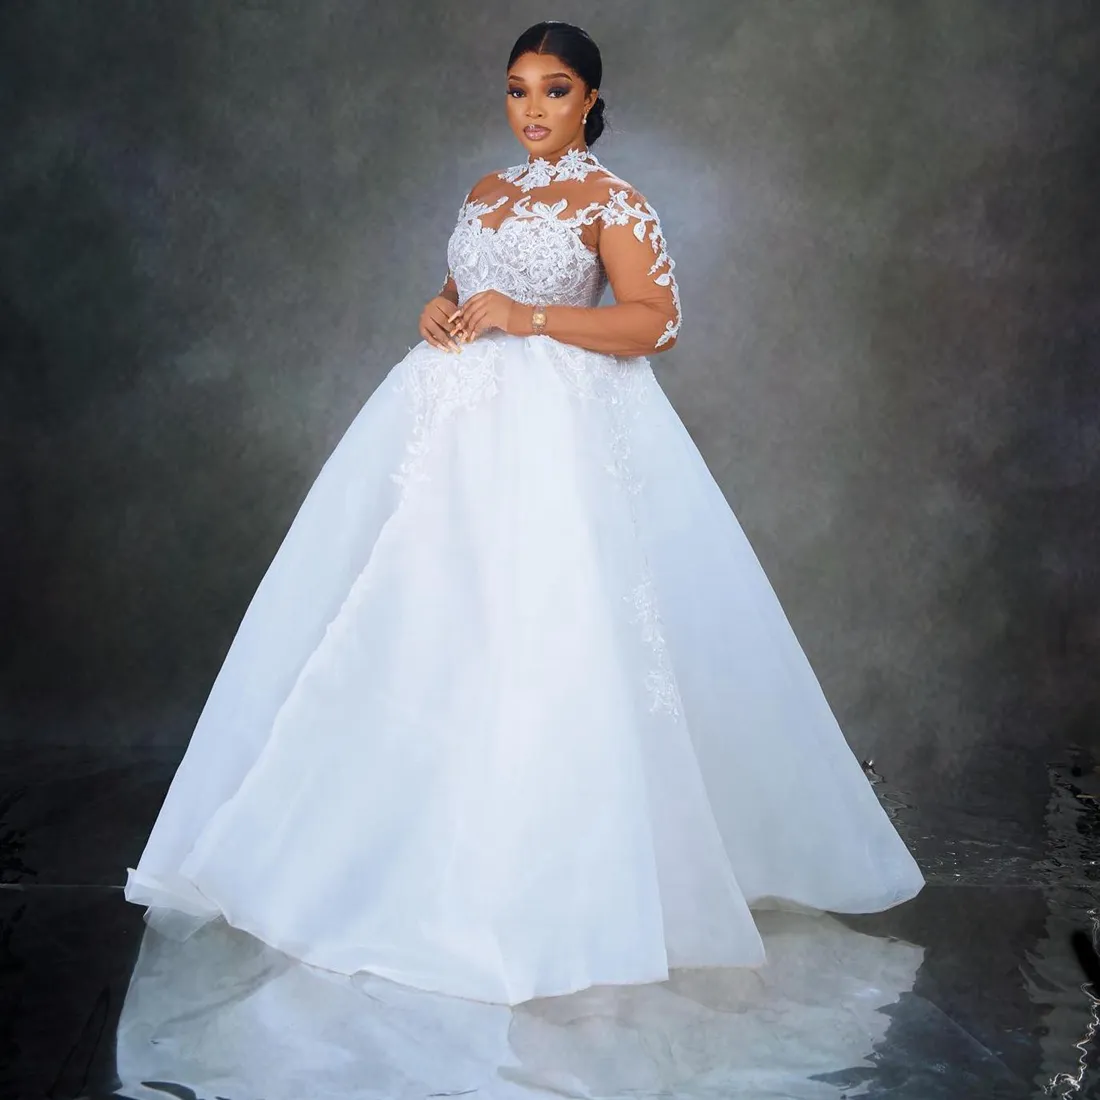 Aso Ebi Wedding Dresses for Bride Sheer Neck Long Sleeves Ball Gowns Princess Queen Bridal Dress Appliqued Lace Wedding Gown For African Black Women Marriage D121